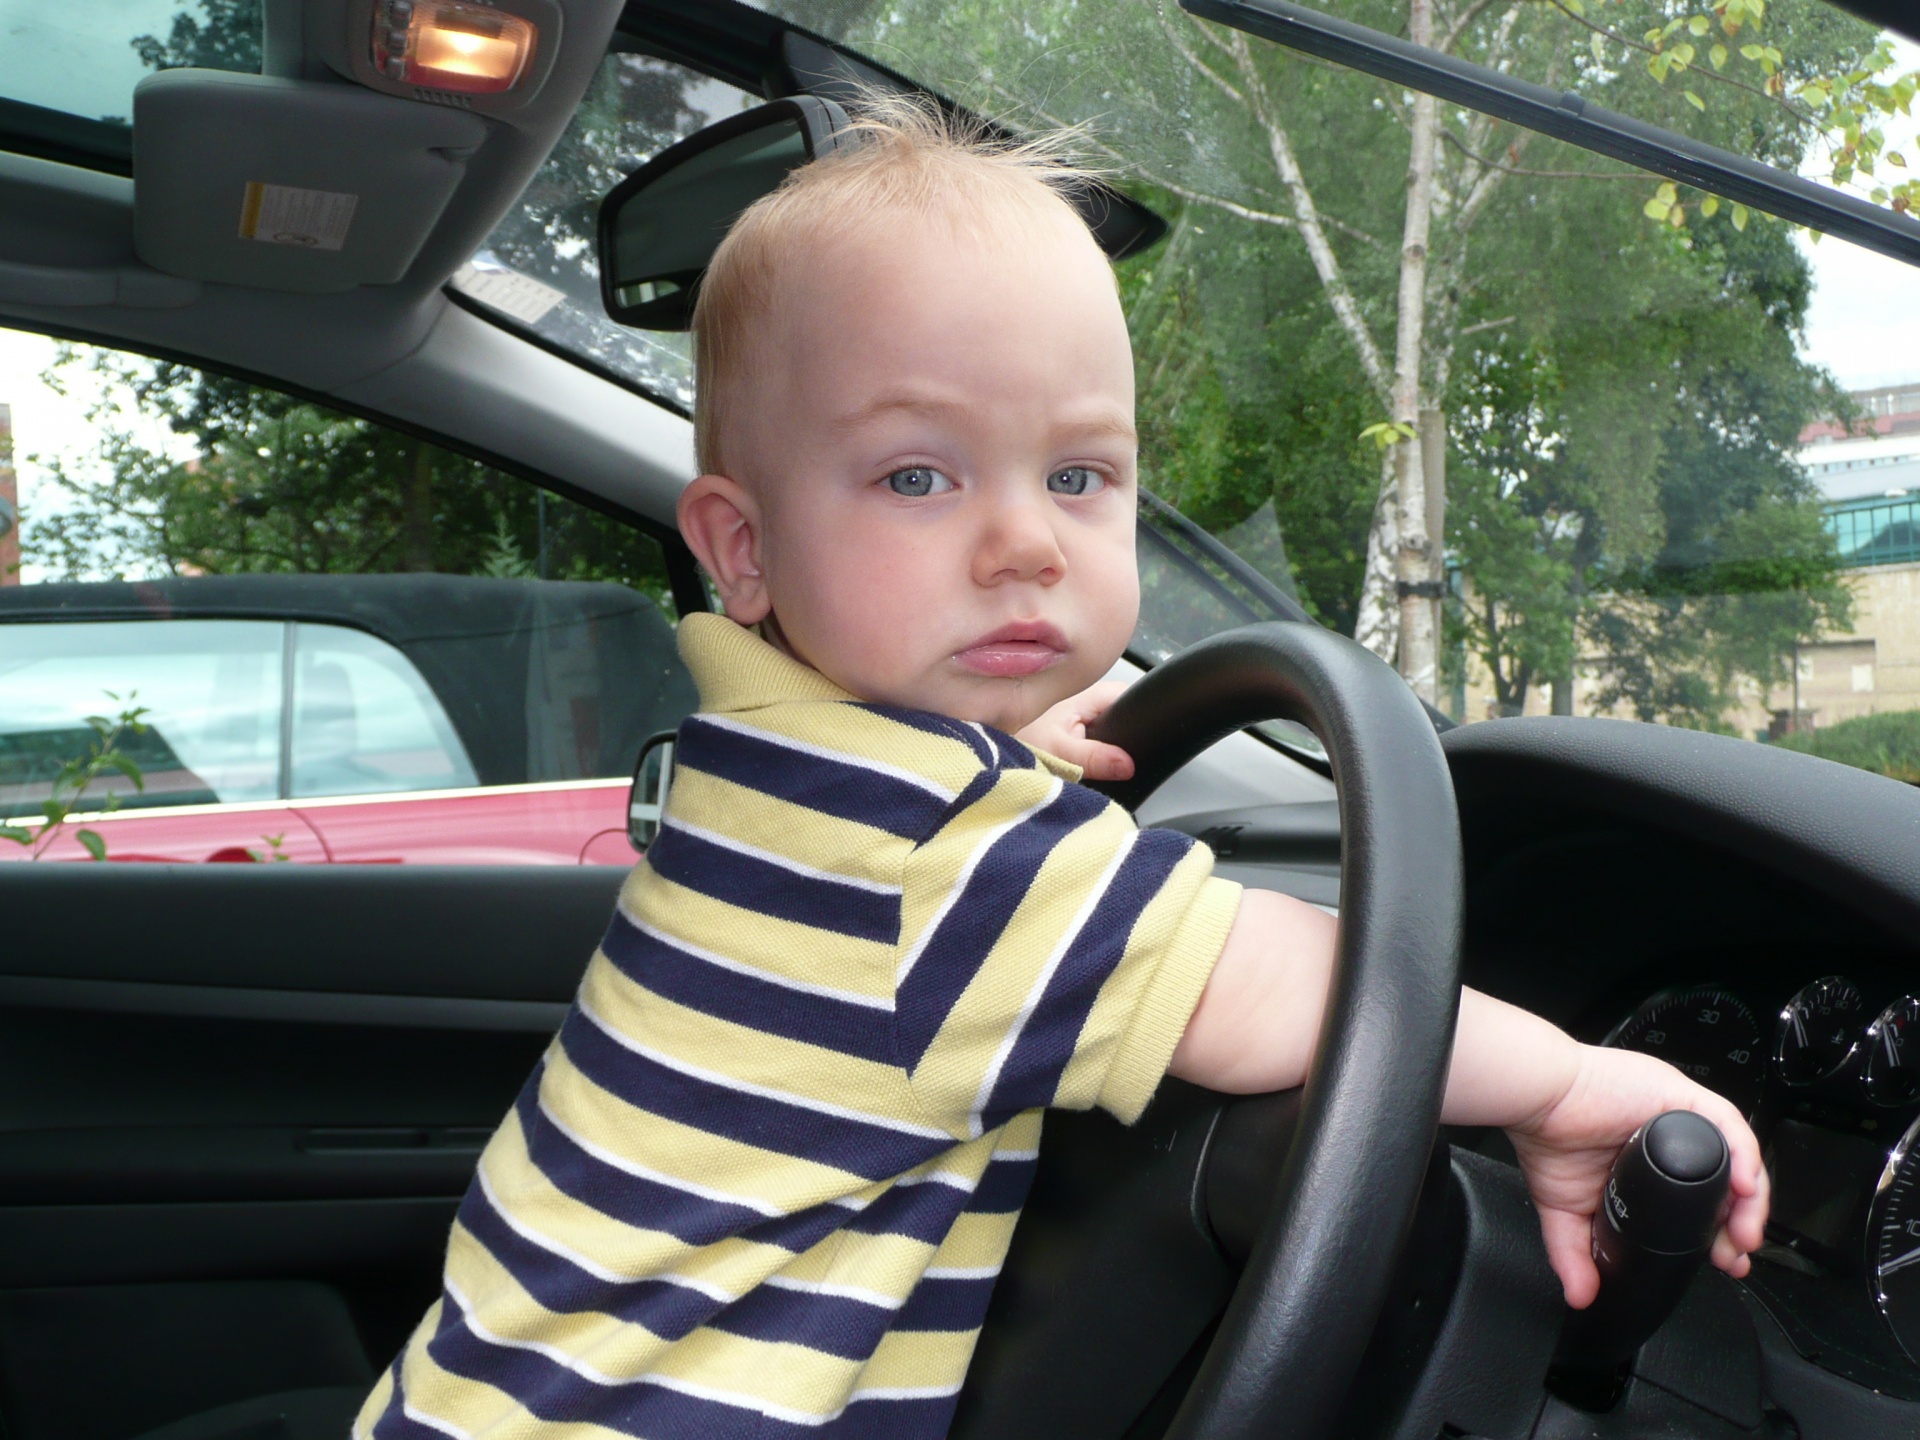 little-2-years-old-boy-drives-a-car-1454883614pCw